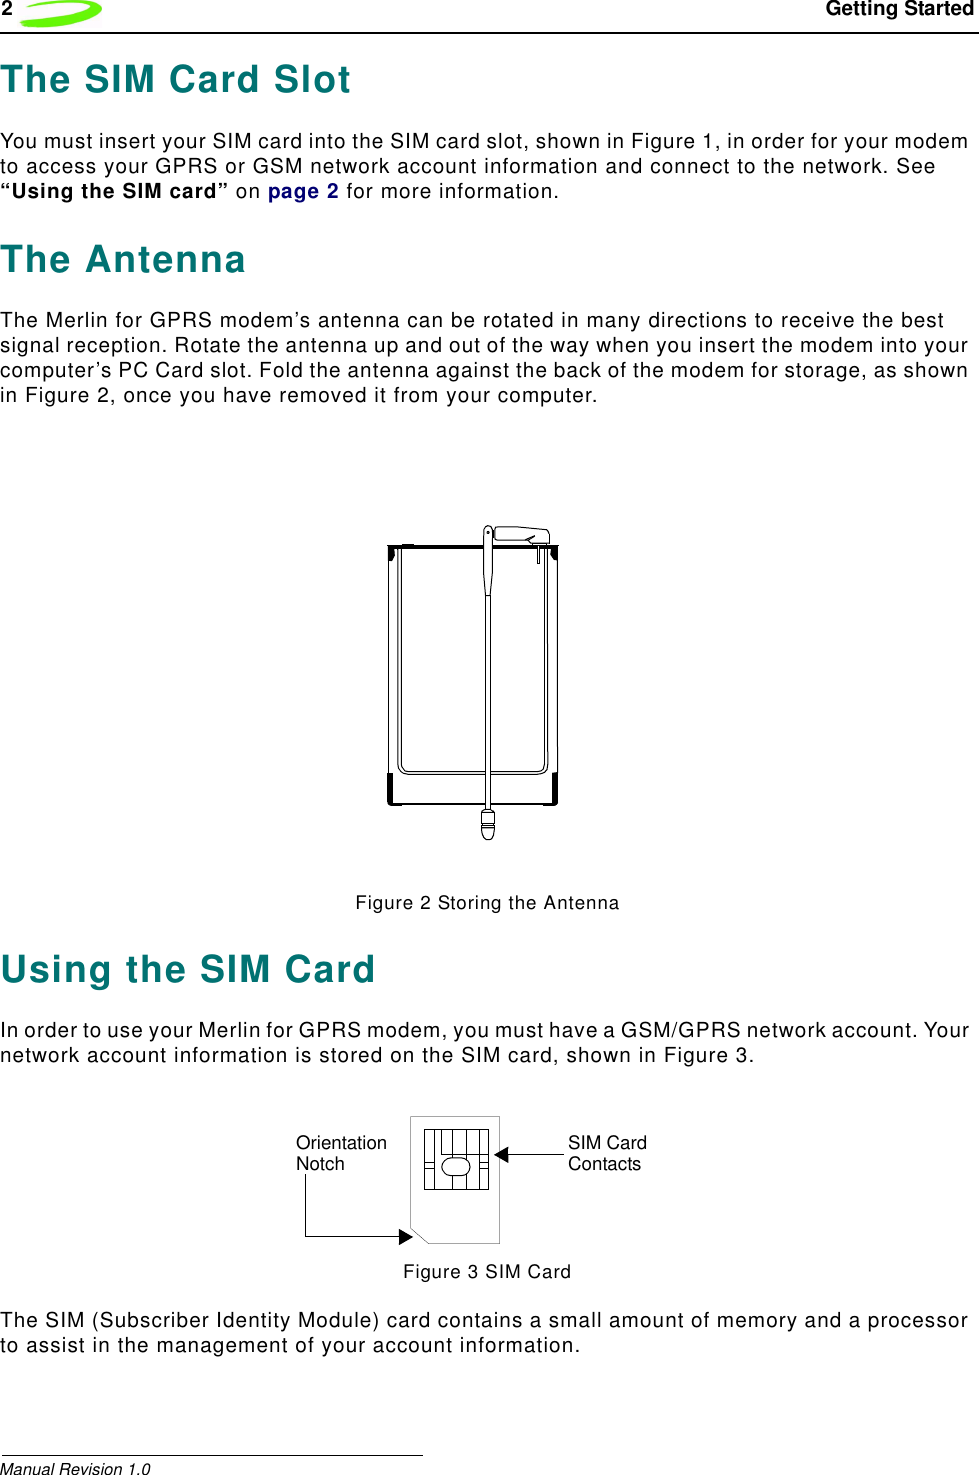 2 Getting StartedManual Revision 1.0The SIM Card SlotYou must insert your SIM card into the SIM card slot, shown in Figure 1, in order for your modem to access your GPRS or GSM network account information and connect to the network. See “Using the SIM card” on page 2 for more information.The AntennaThe Merlin for GPRS modem’s antenna can be rotated in many directions to receive the best signal reception. Rotate the antenna up and out of the way when you insert the modem into your computer’s PC Card slot. Fold the antenna against the back of the modem for storage, as shown in Figure 2, once you have removed it from your computer.Figure 2 Storing the AntennaUsing the SIM CardIn order to use your Merlin for GPRS modem, you must have a GSM/GPRS network account. Your network account information is stored on the SIM card, shown in Figure 3.Figure 3 SIM CardThe SIM (Subscriber Identity Module) card contains a small amount of memory and a processor to assist in the management of your account information.SIM Card ContactsOrientationNotch